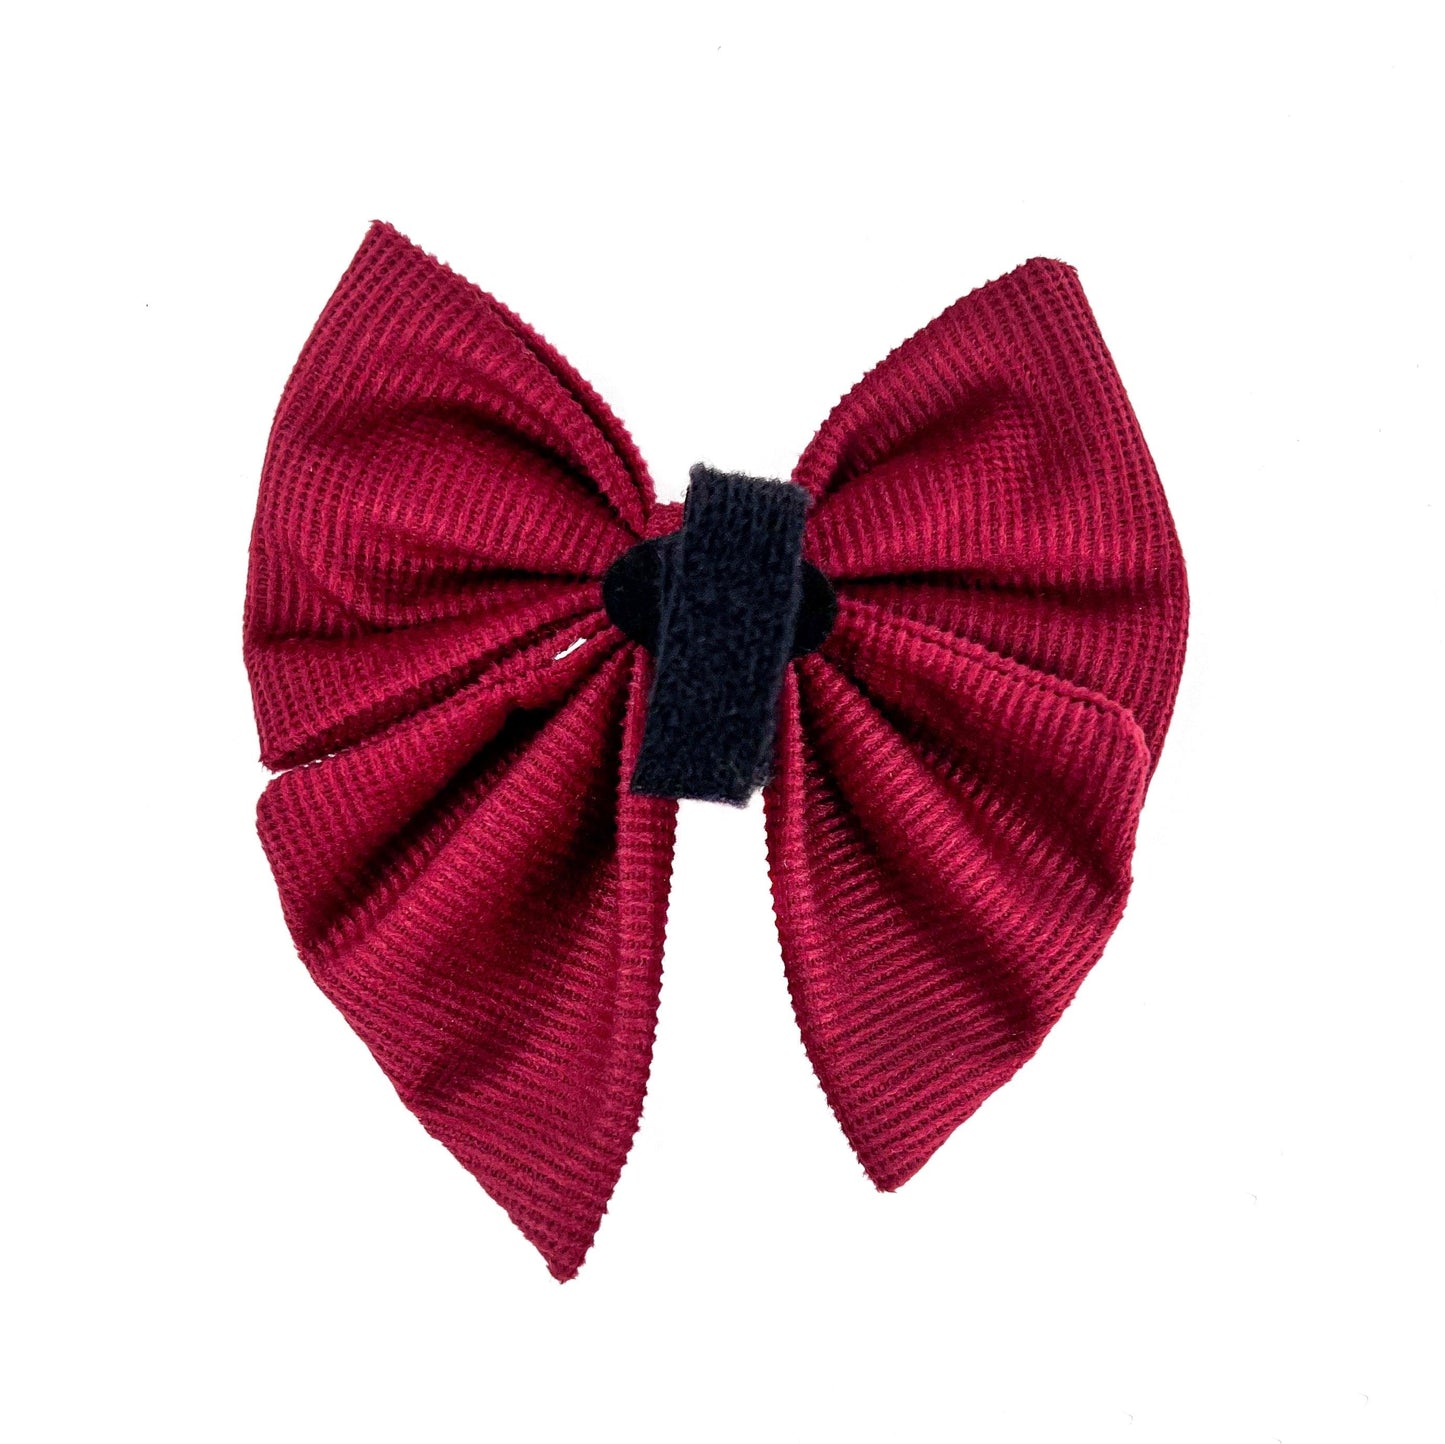 Shop Easy-attach, Thick, Durable, and Adjustable Corduroy Sailor Bow Tie Berry by Boogs & Boop